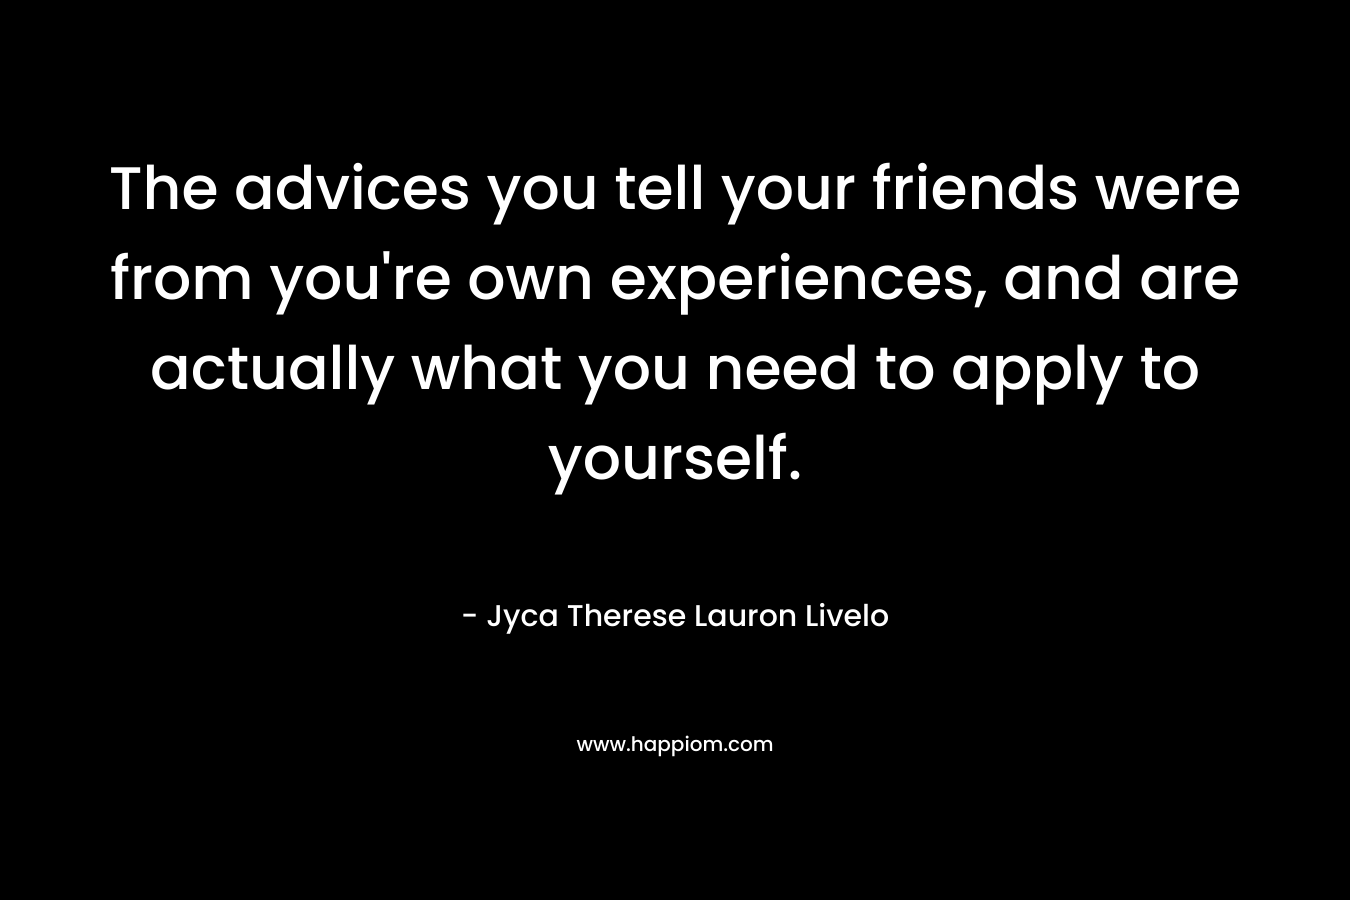 The advices you tell your friends were from you’re own experiences, and are actually what you need to apply to yourself. – Jyca Therese Lauron Livelo